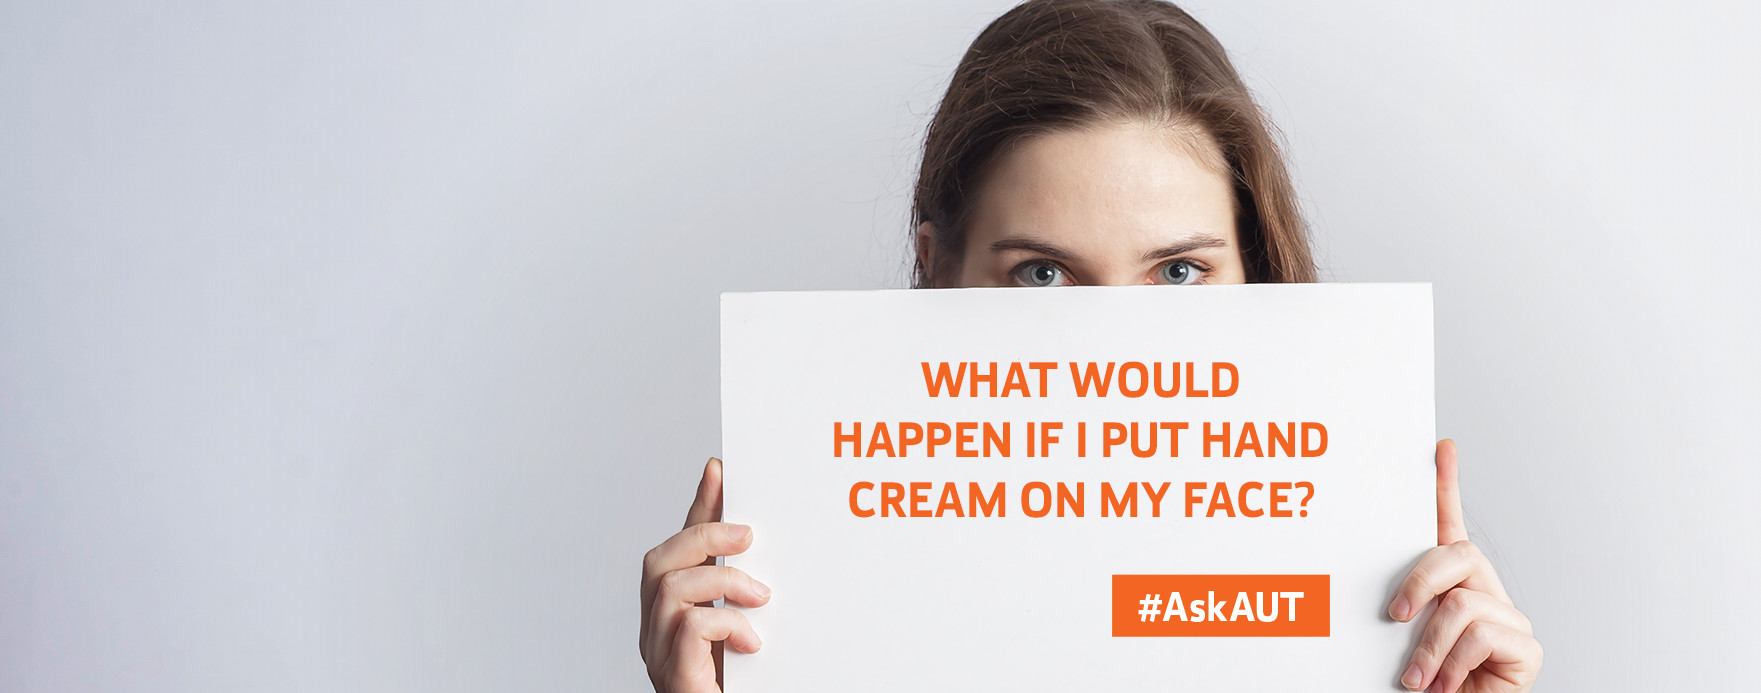 What would happen if I put Hand Cream on my Face?